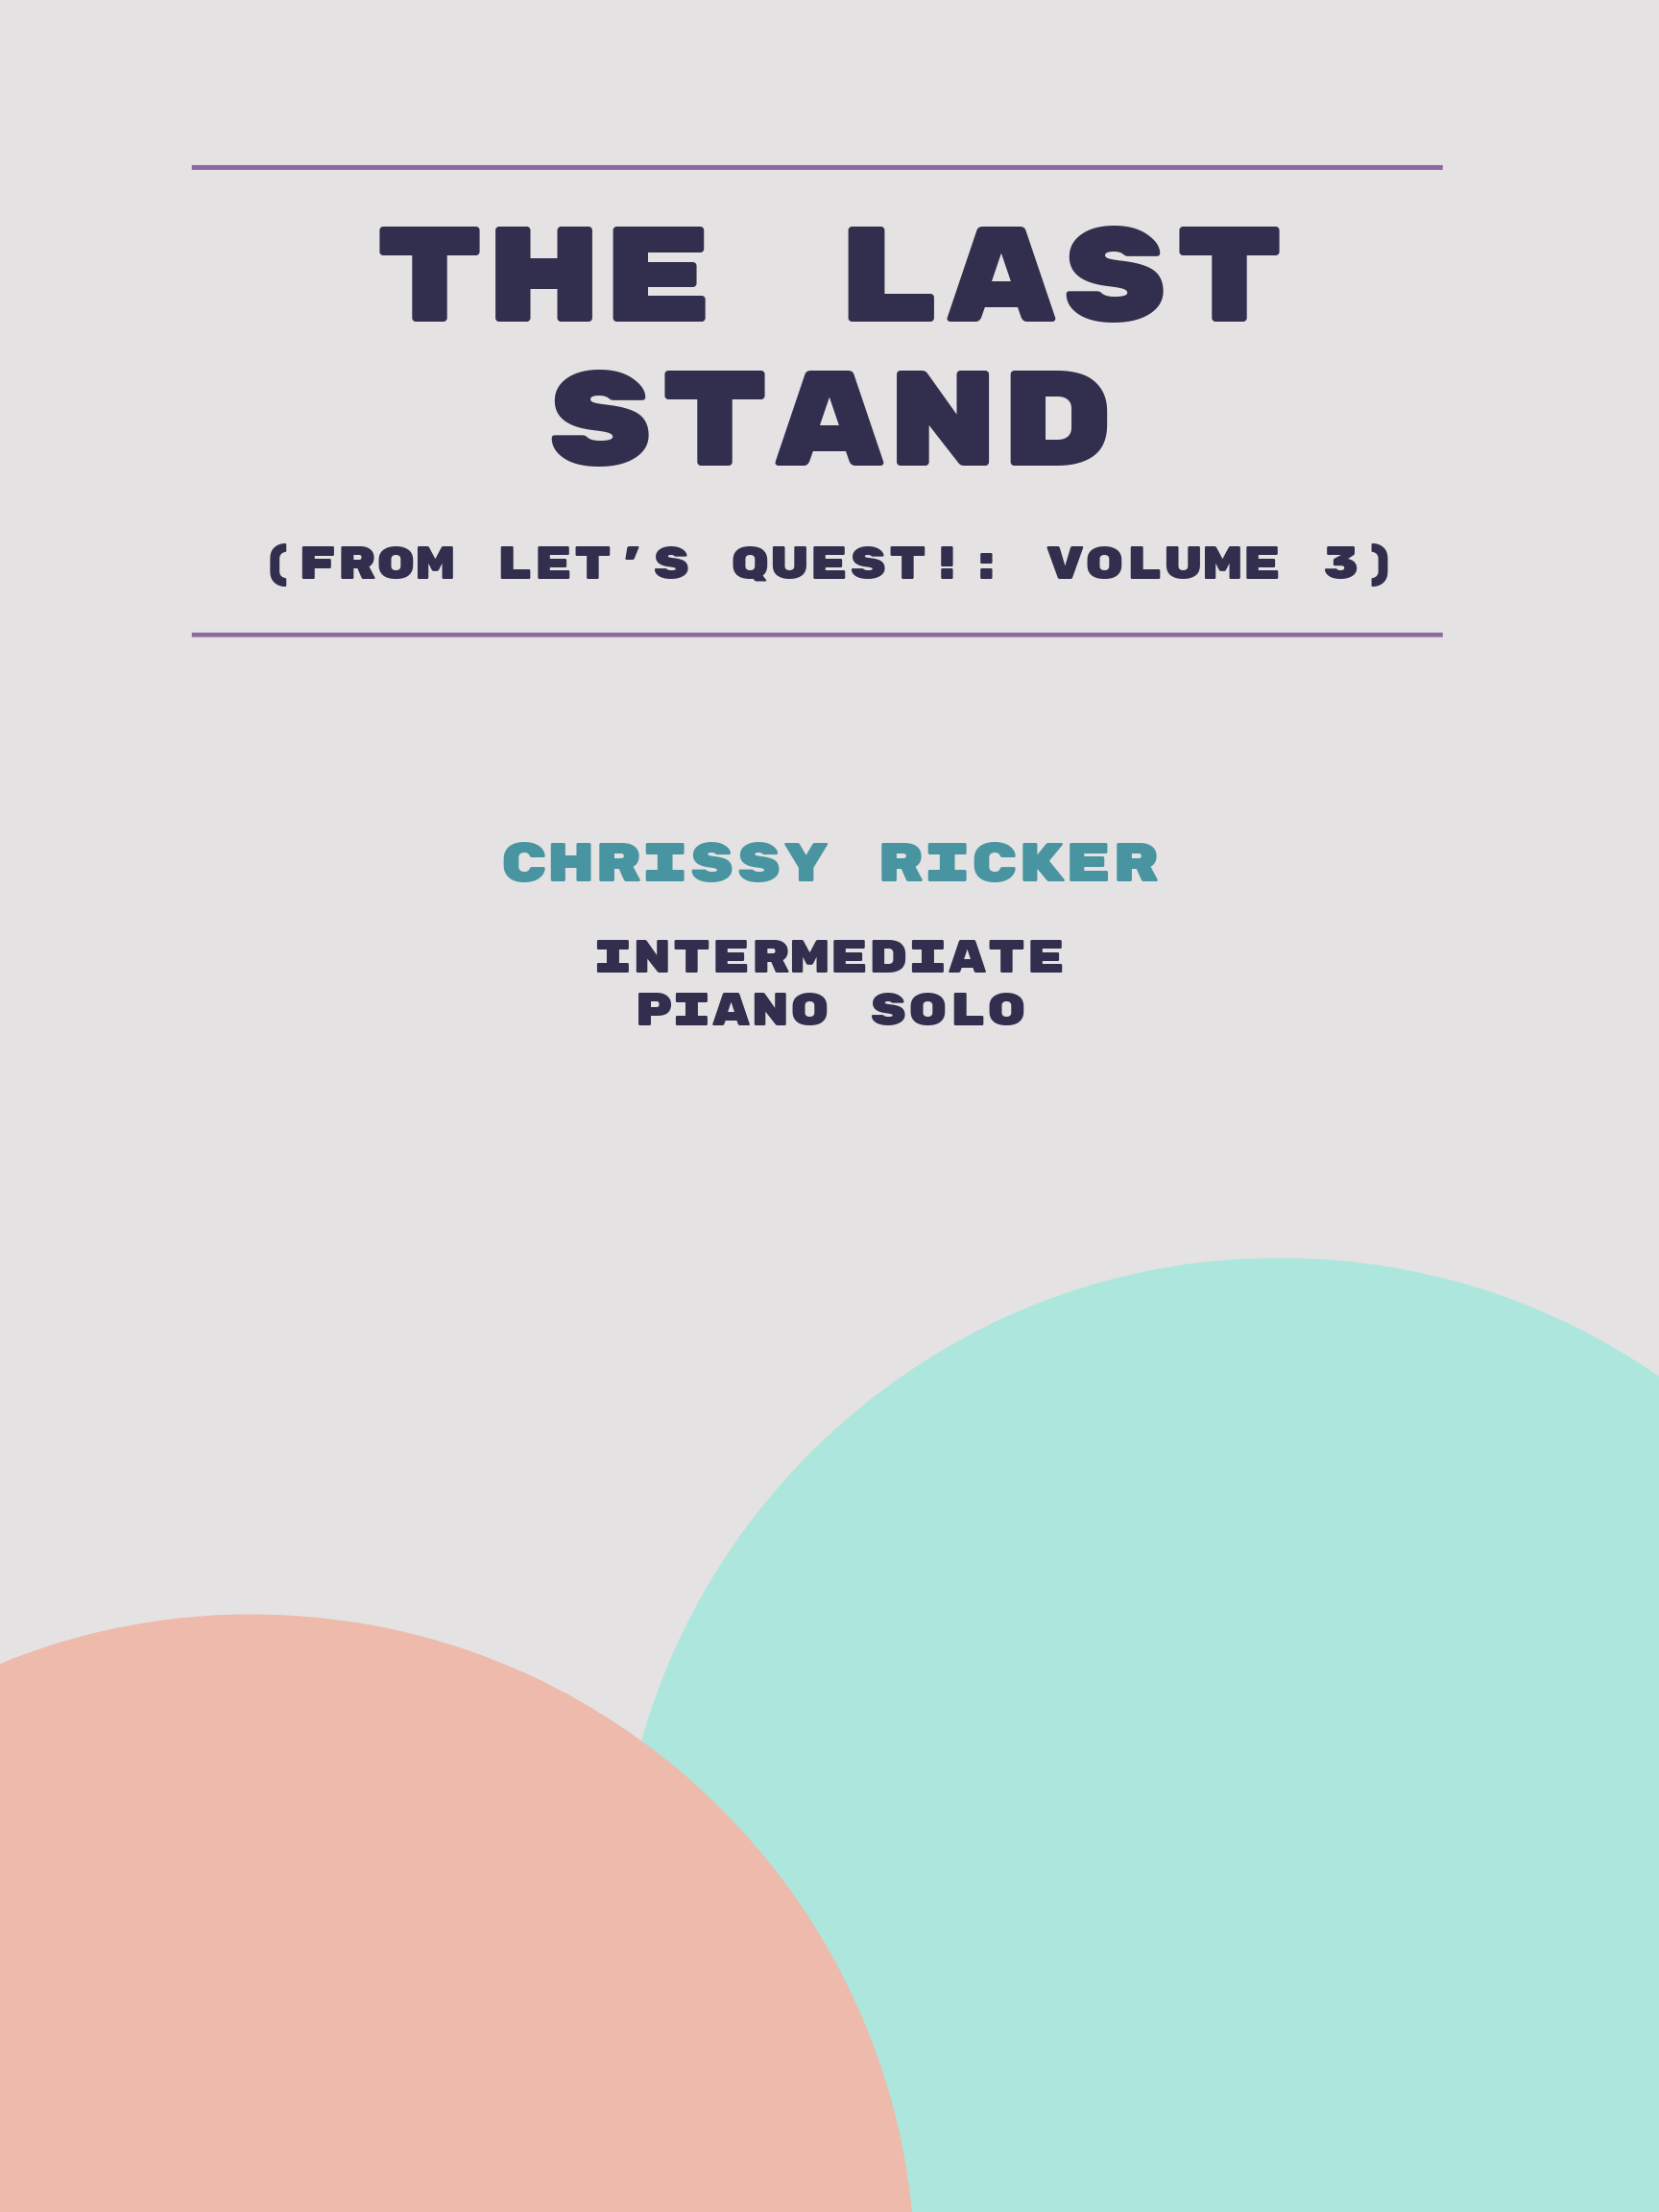 The Last Stand by Chrissy Ricker